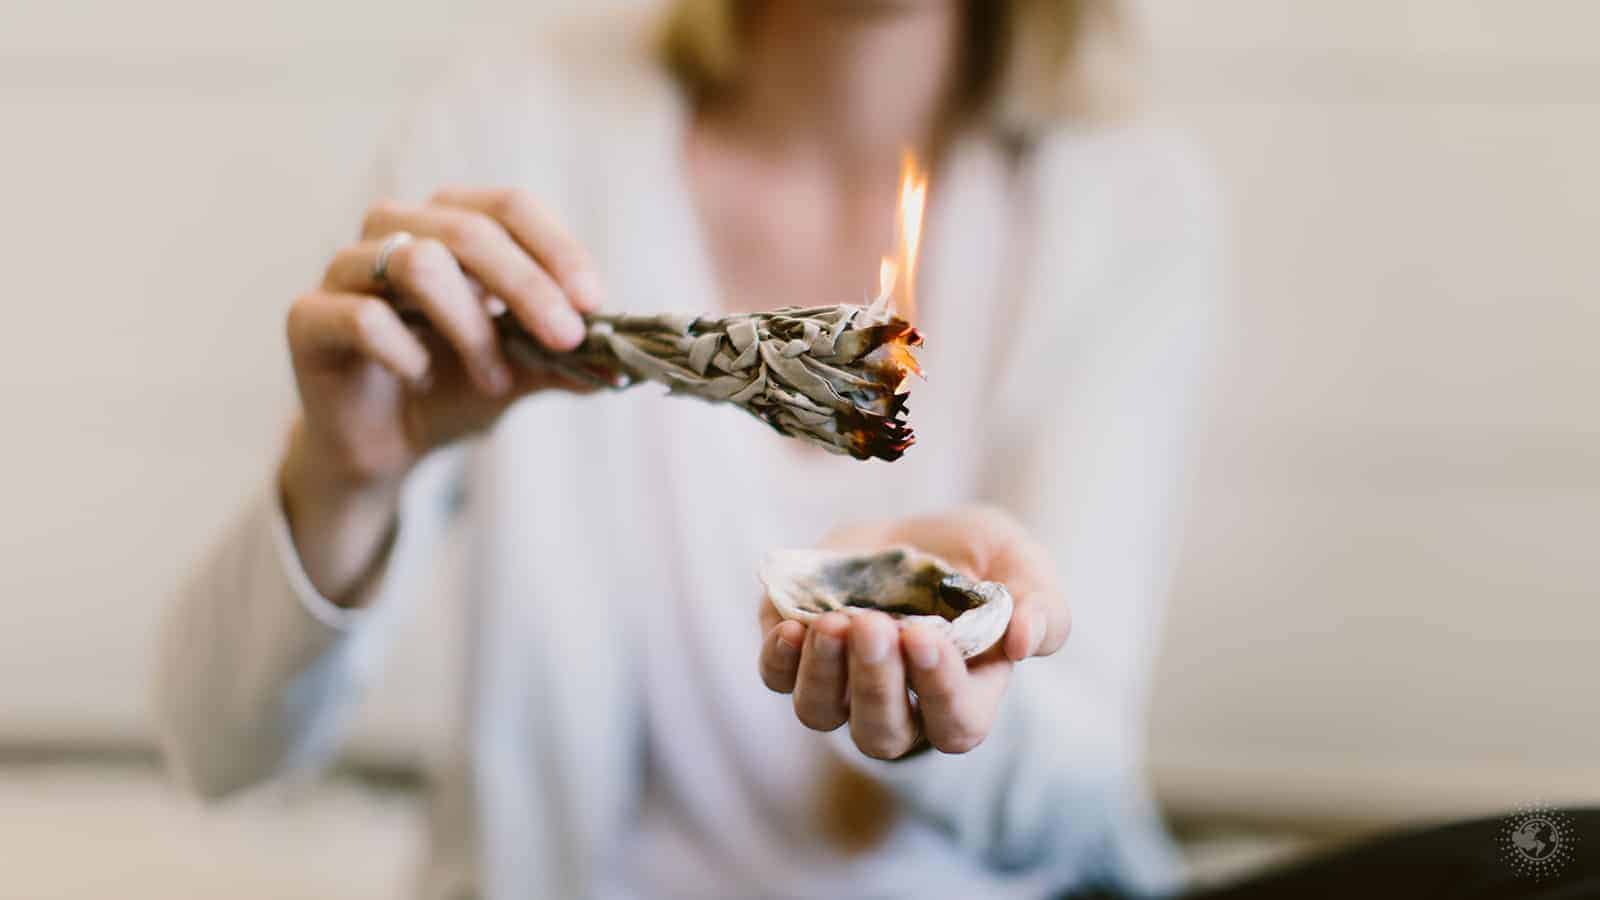 10 Healthy Benefits of Burning Sage in Your Home